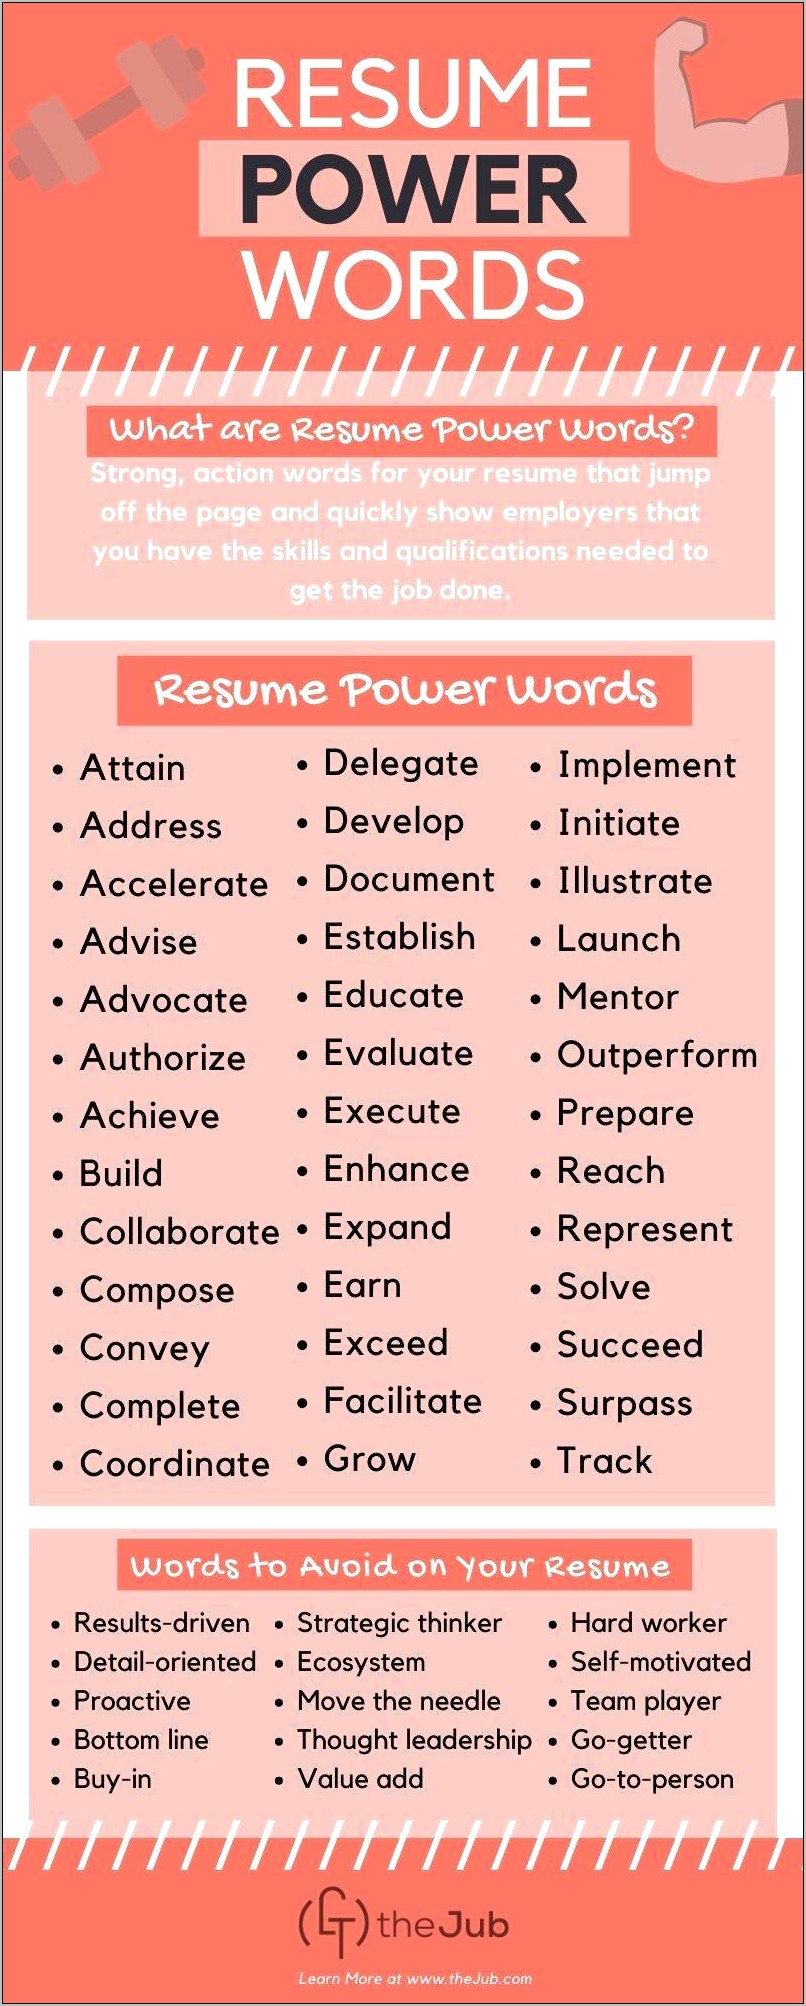 Another Word For Coordinate On Resume